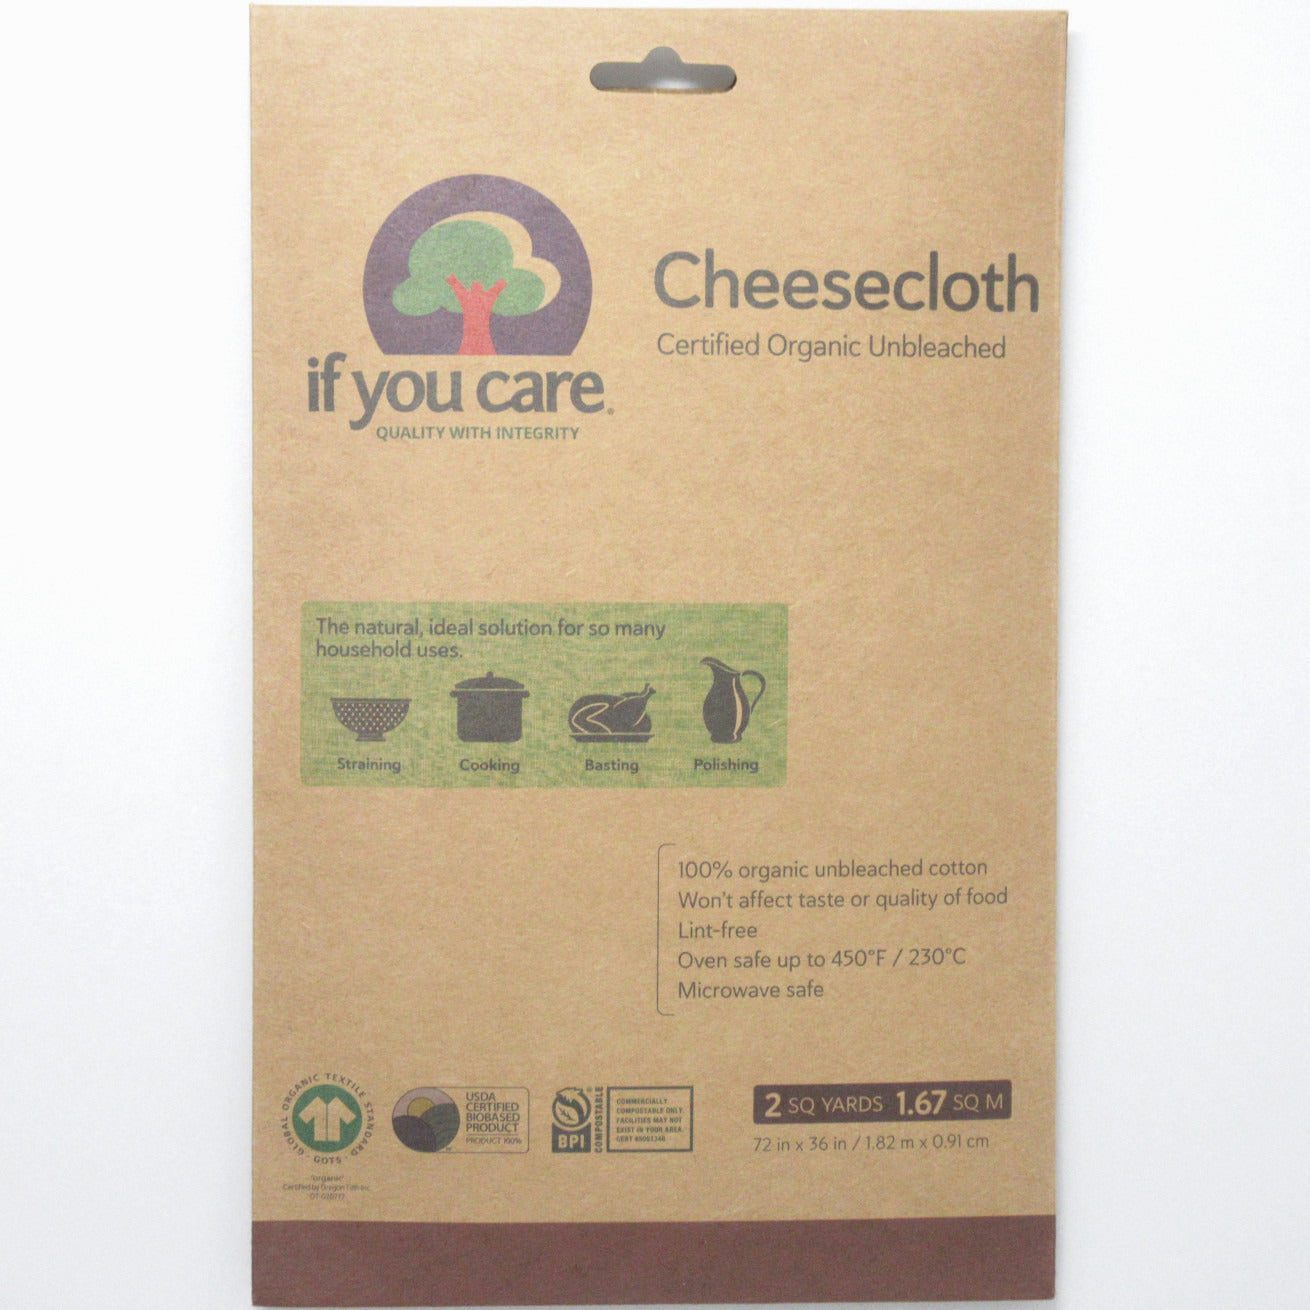 Flour Barrel product image - If You Care Cheesecloth